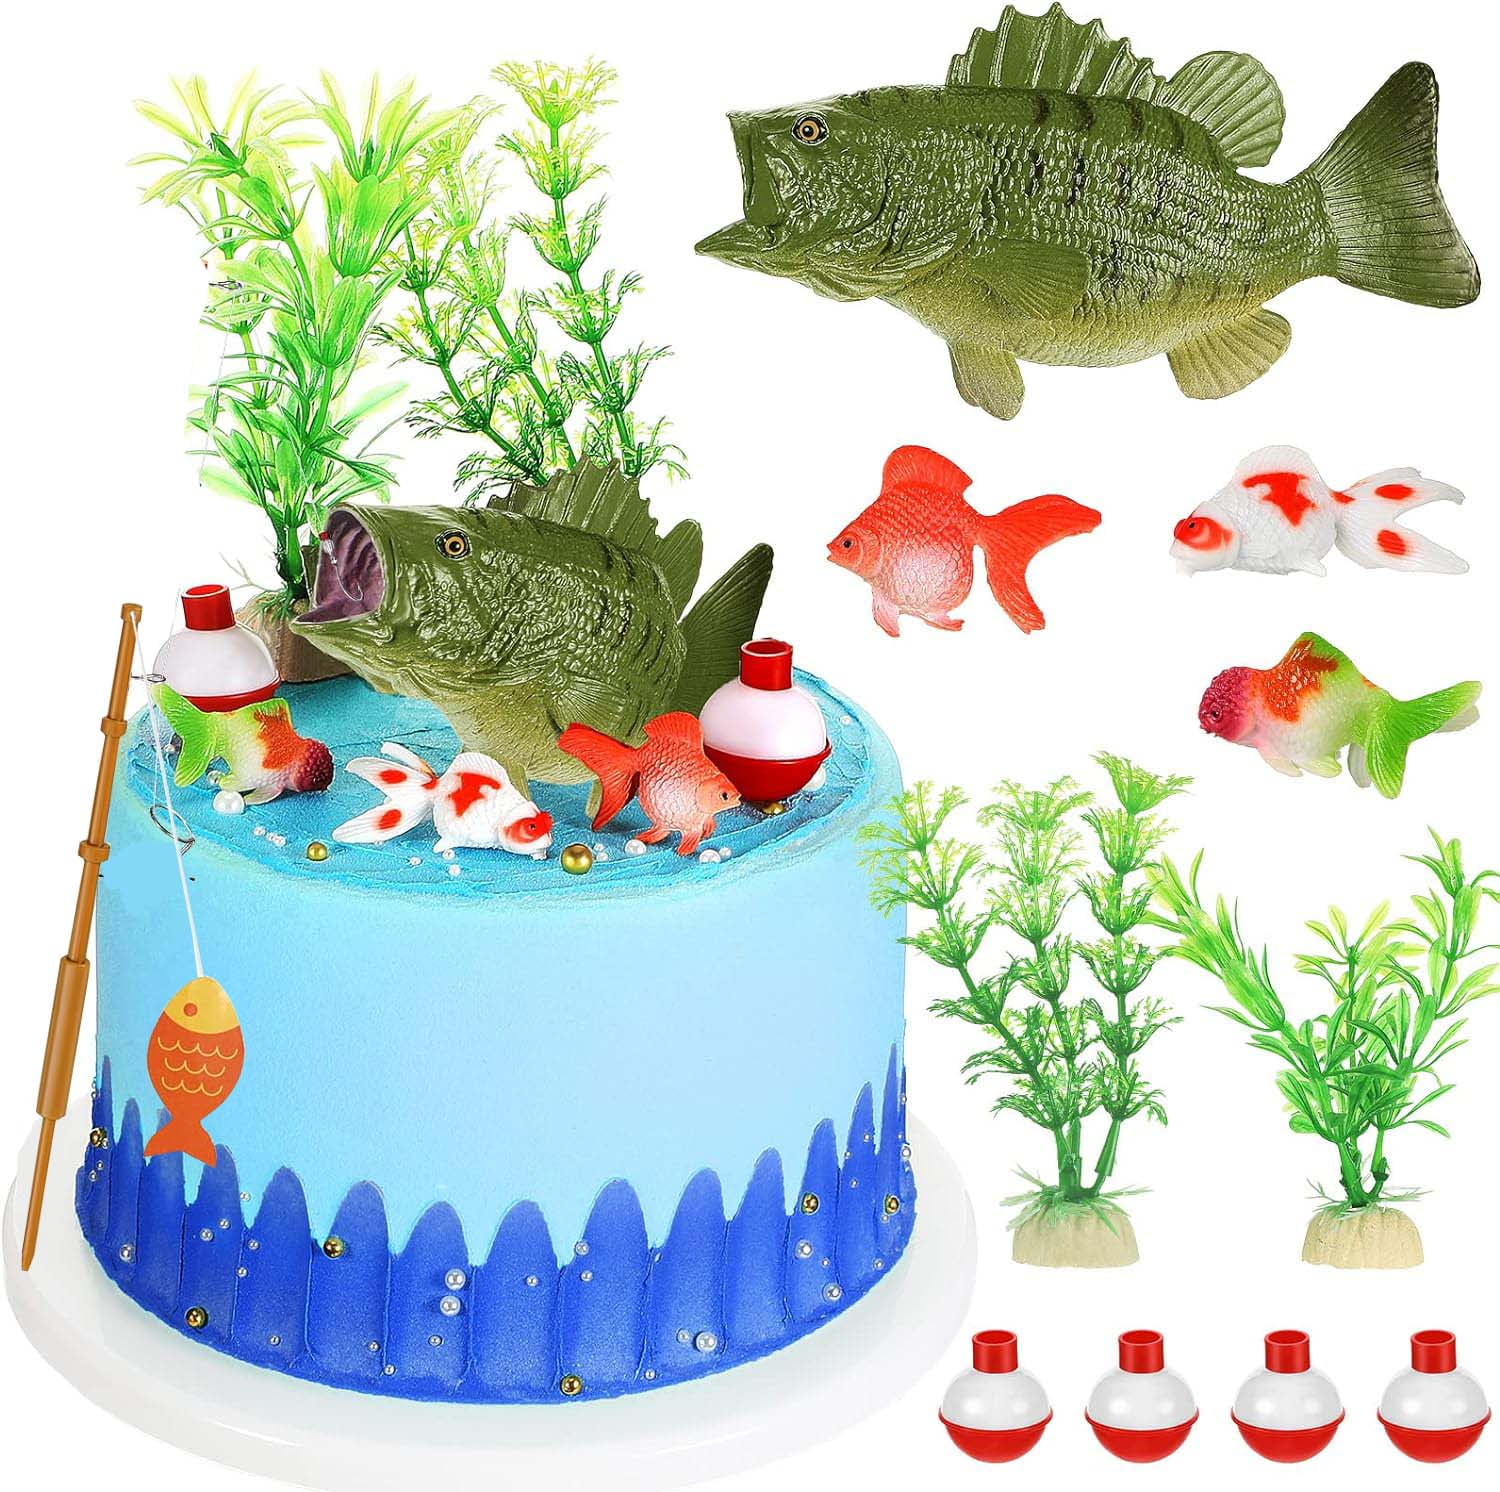 Gone Fishing Cake Decoration Fish Cake Topper Catching the Big One Cake  Supplies Fisherman Themed Birthday Cake Topper Sea Bass Figurines for Man  Kids